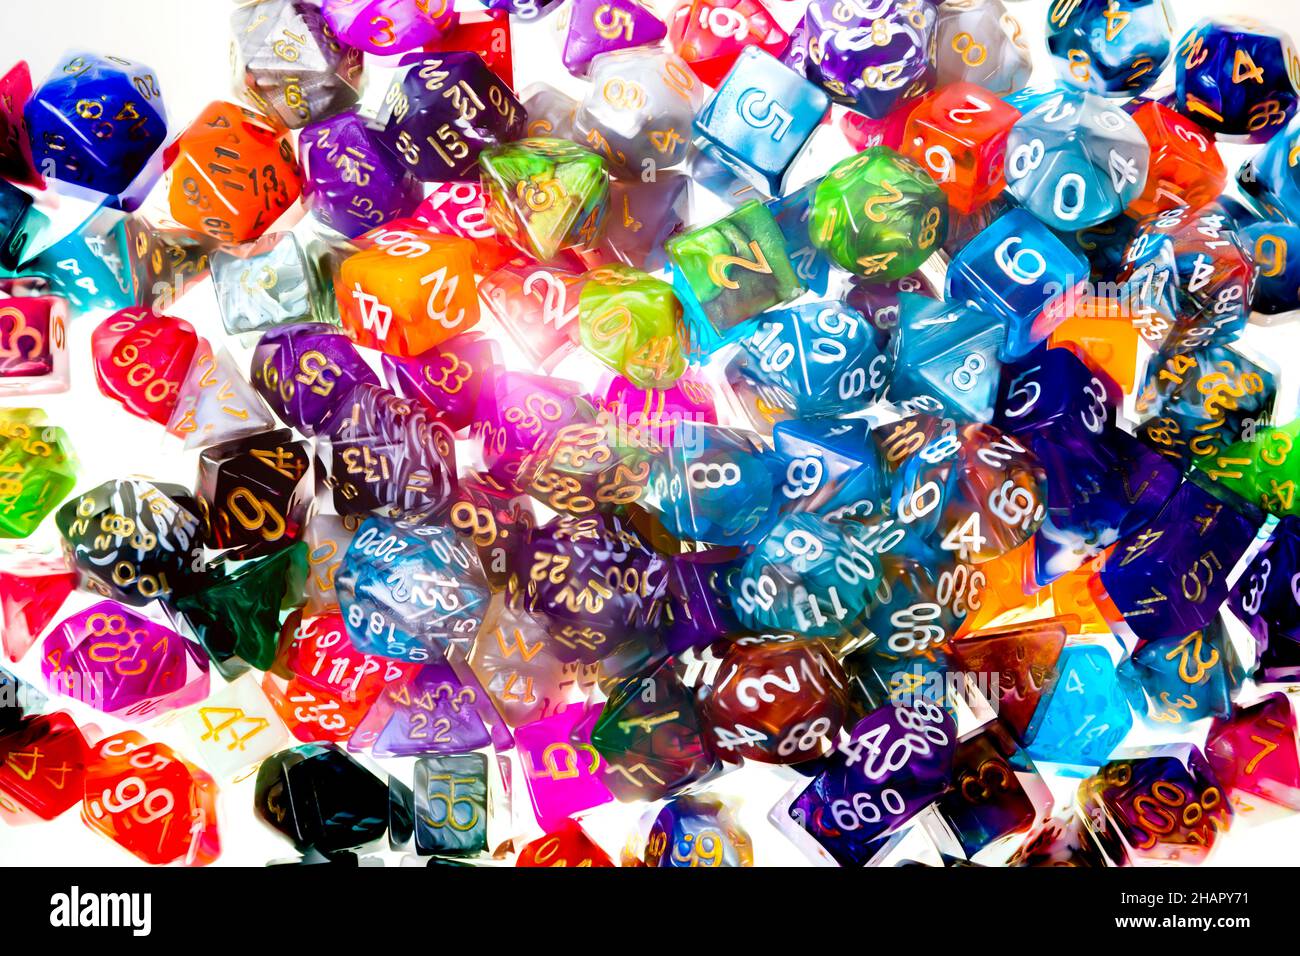 Motion blur shot of a pile of multicolored dice Stock Photo